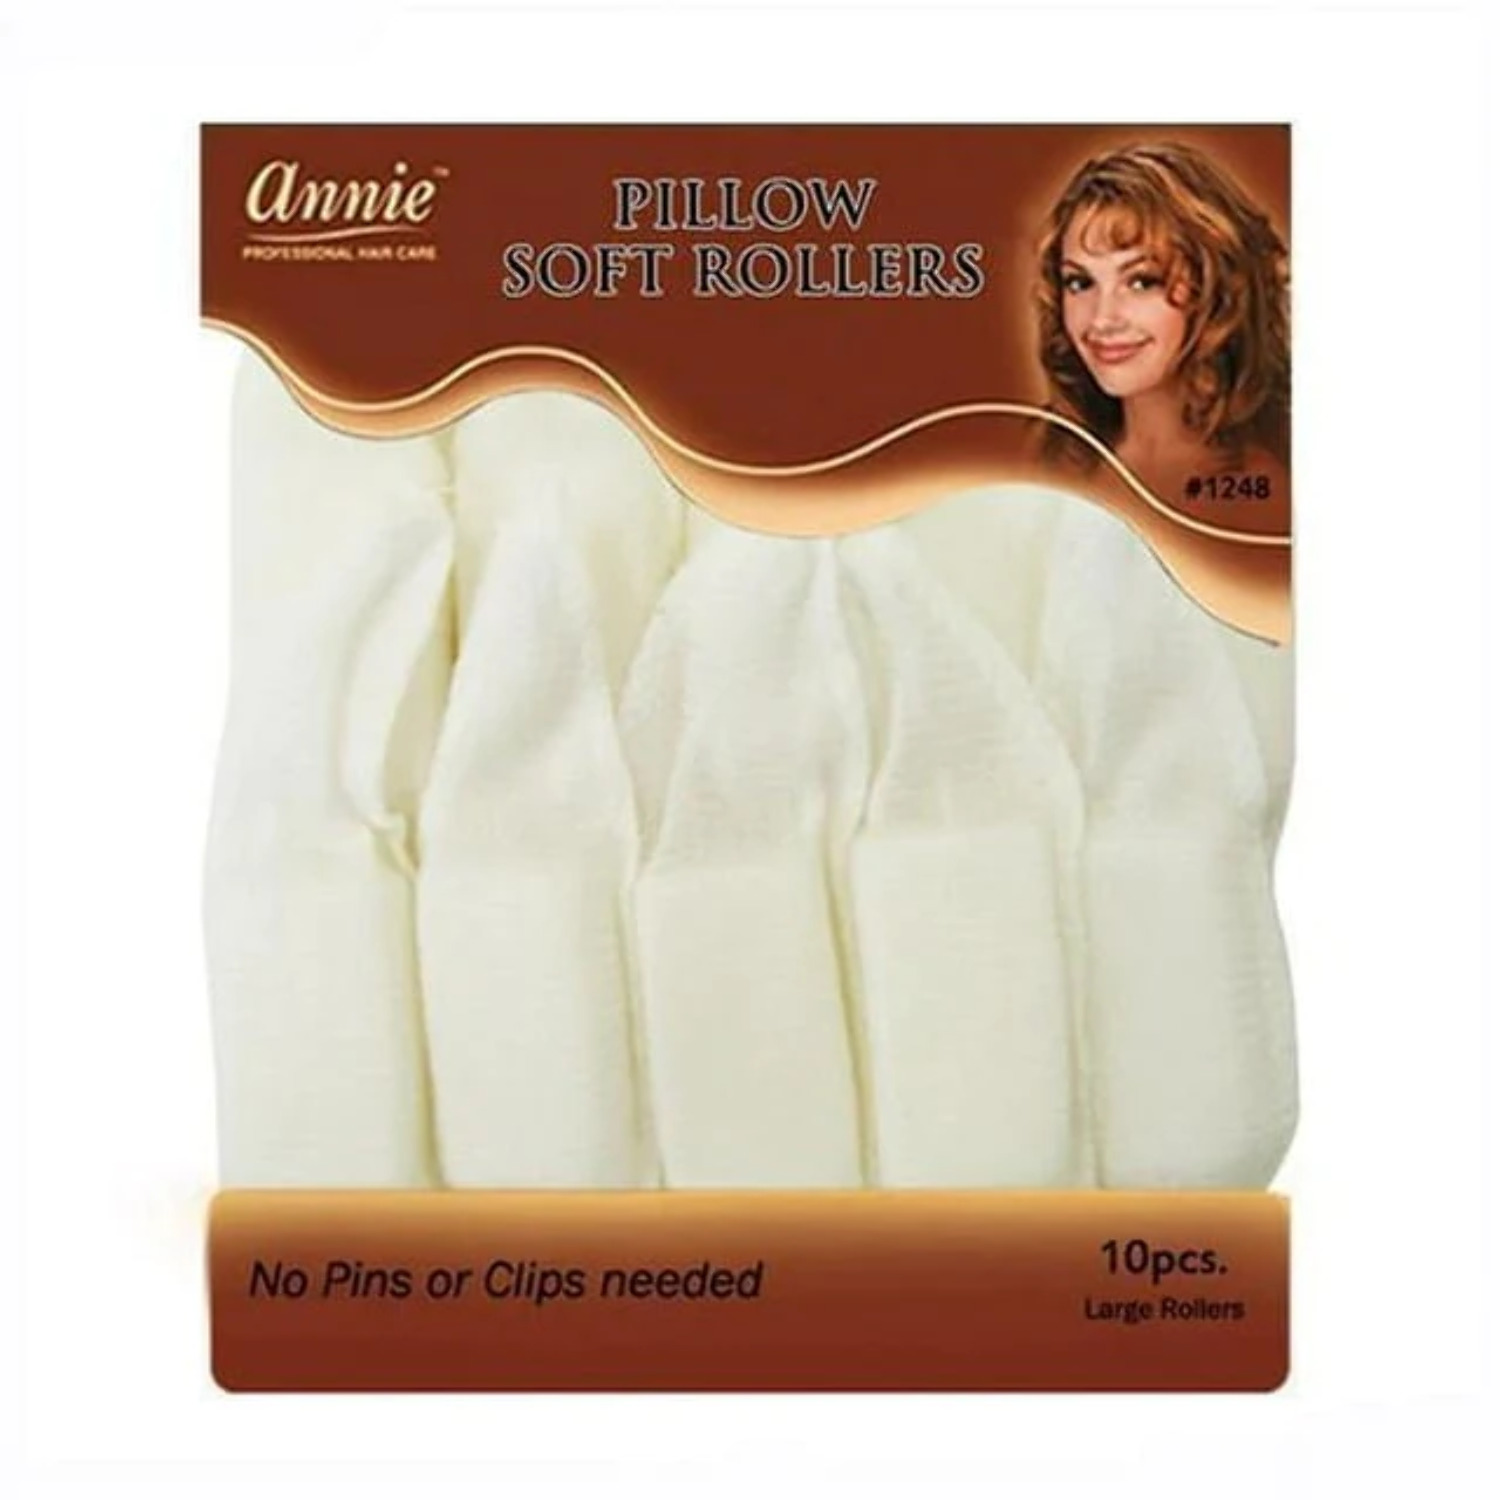 Annie Pillow Soft Large White Hair Rollers - 10 Pcs. - image 2 of 3